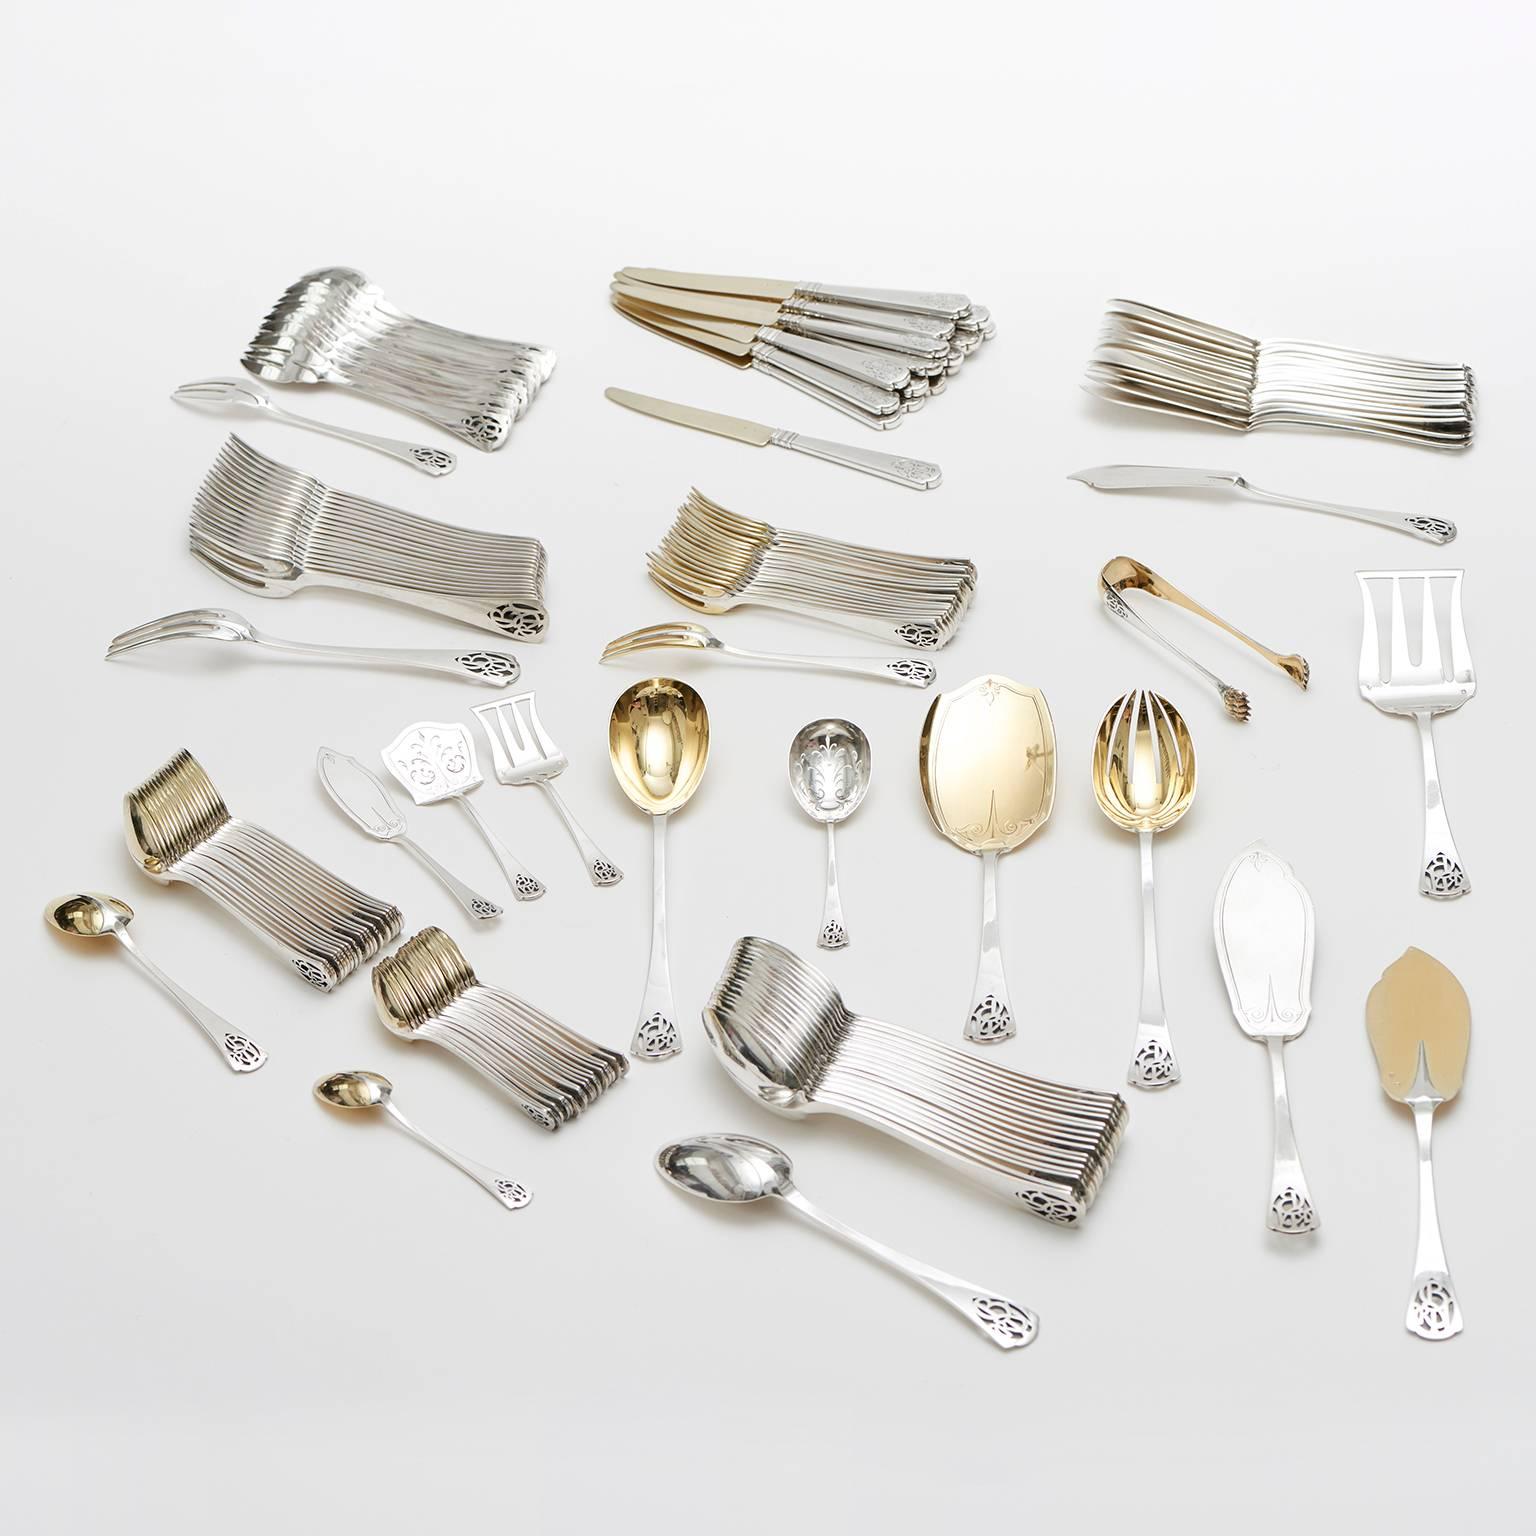 Circa 1920s, Sterling, Puiforcat for Henin and Cie, Paris, France.  This one-of-a-kind Art Deco sterling flatware set was made by Puiforcat for the renowned Parisian retailer Henin and Cie. Redolent of the unapologetic opulence of the roaring